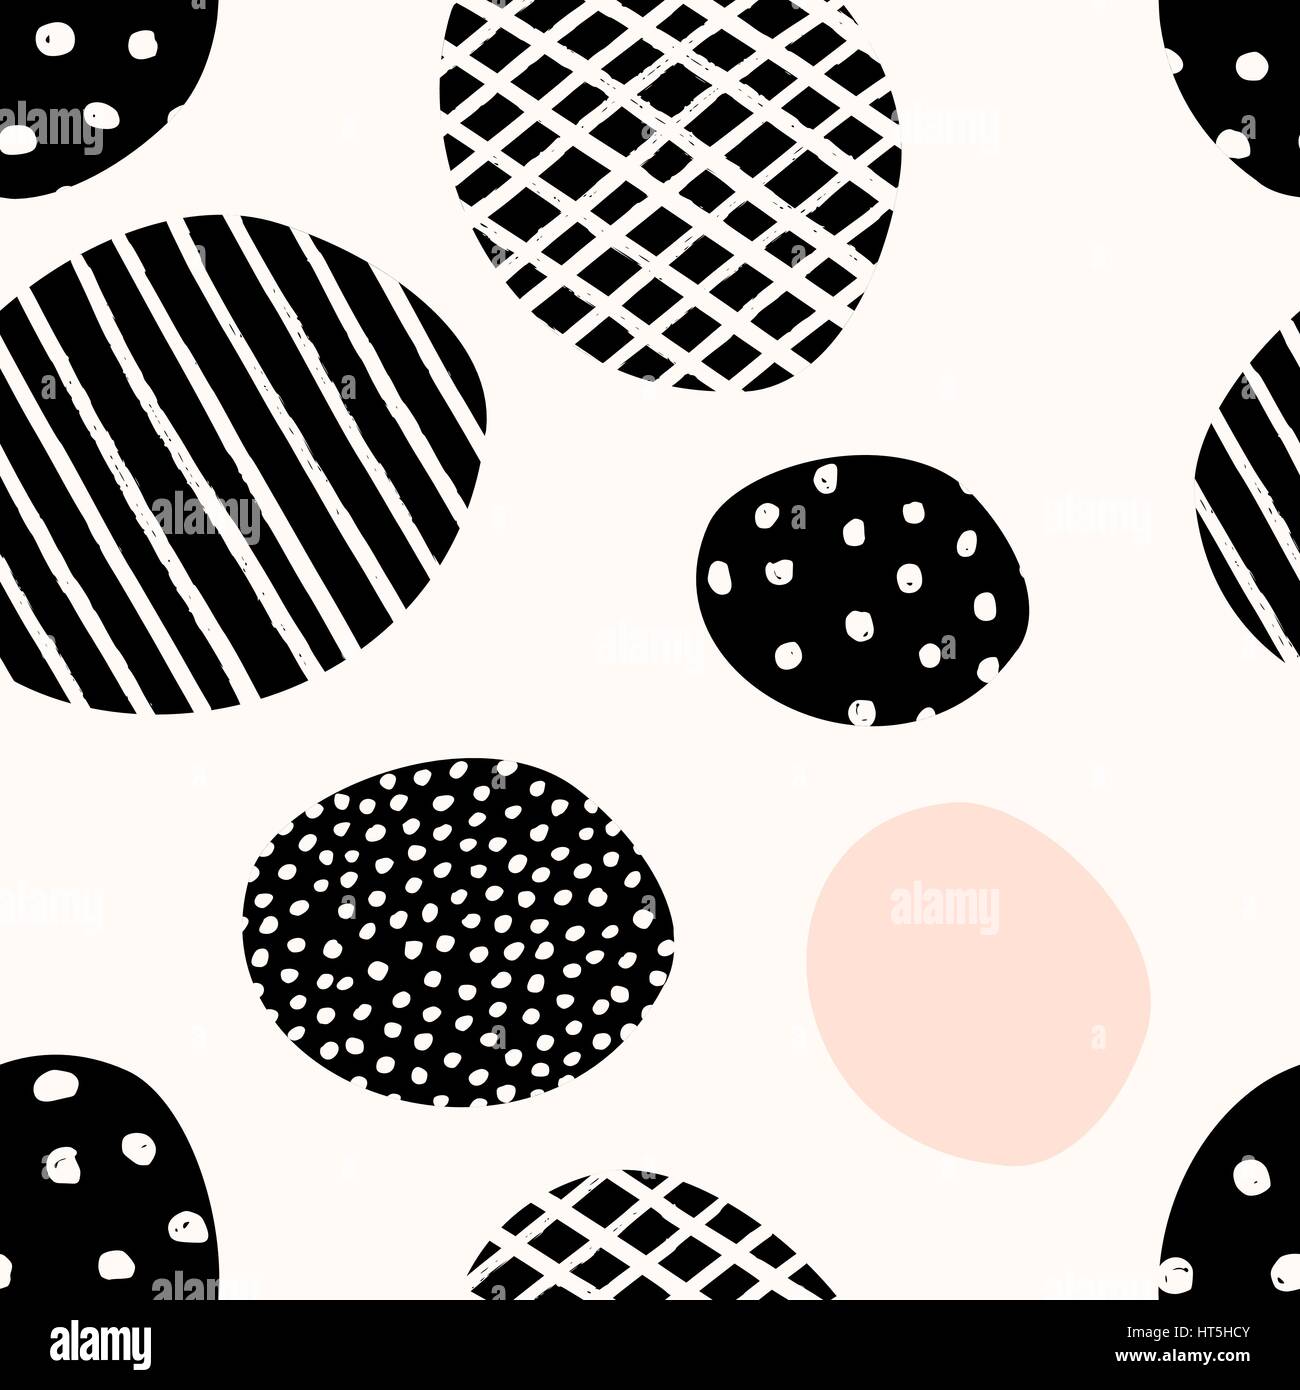 Seamless abstract repeating pattern with geometric shapes in black on white background. Stock Vector